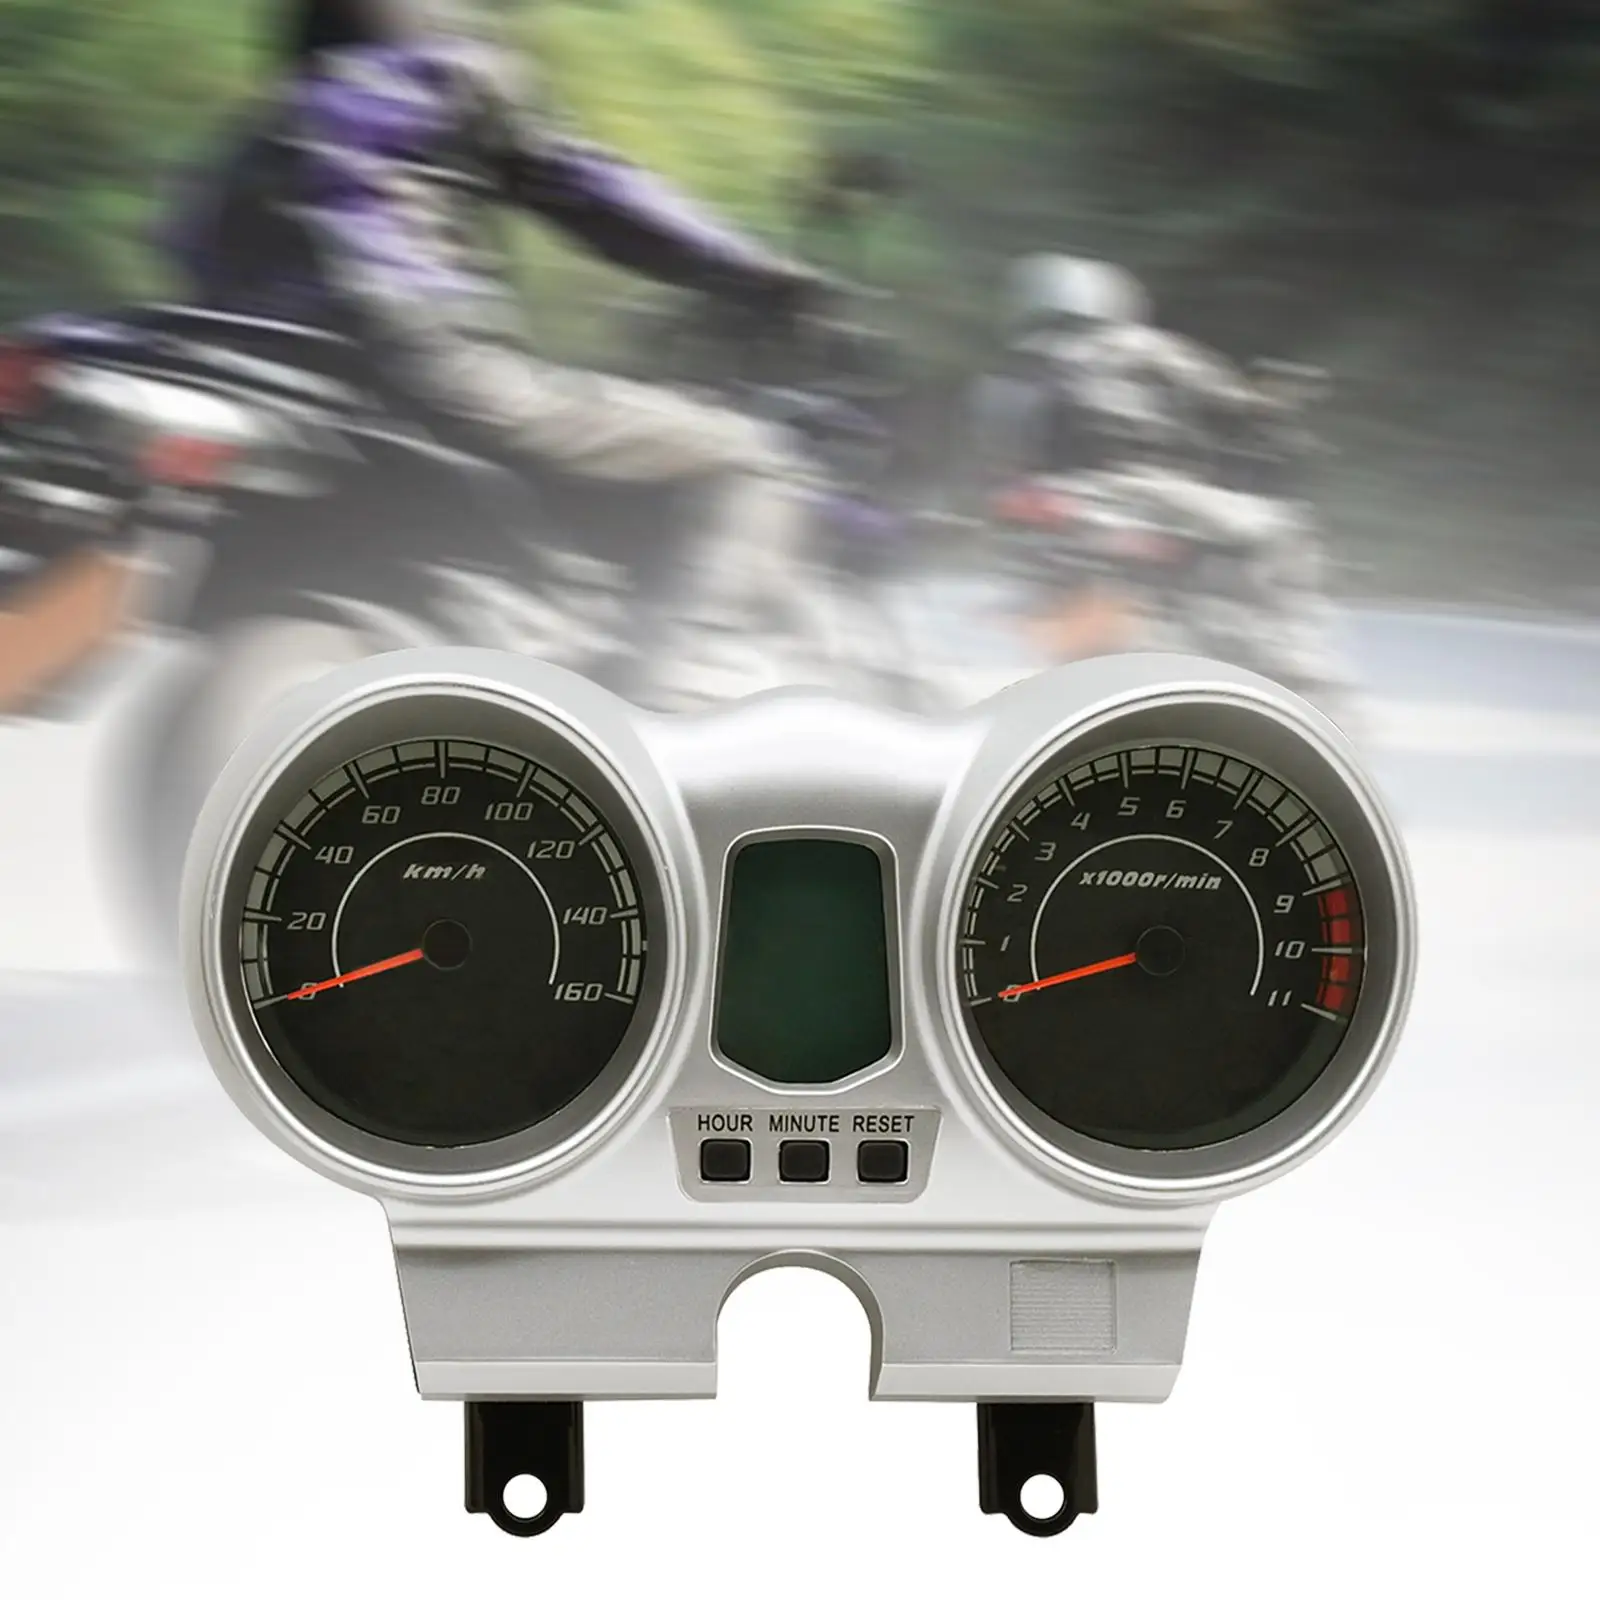 Cbx250 with Multifunction Indicator Light Shockproof Durable Professional Motorcycles Speedometer for Motorbike Accessory